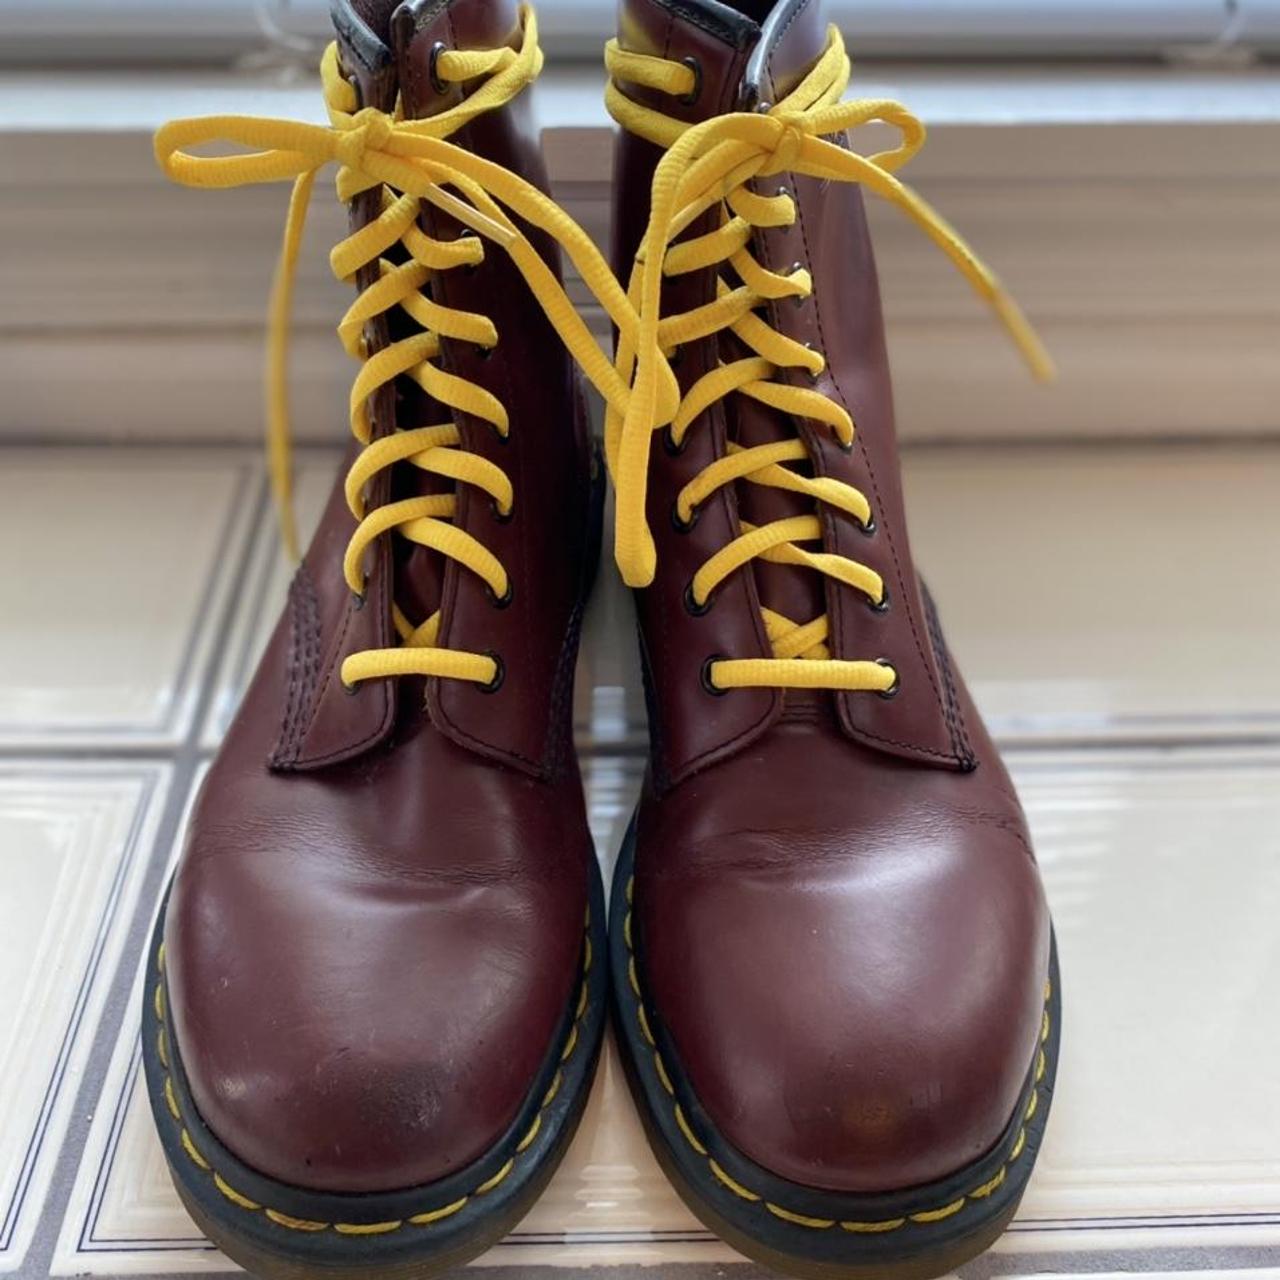 Dr. Martens Men's Burgundy and Red Boots (2)